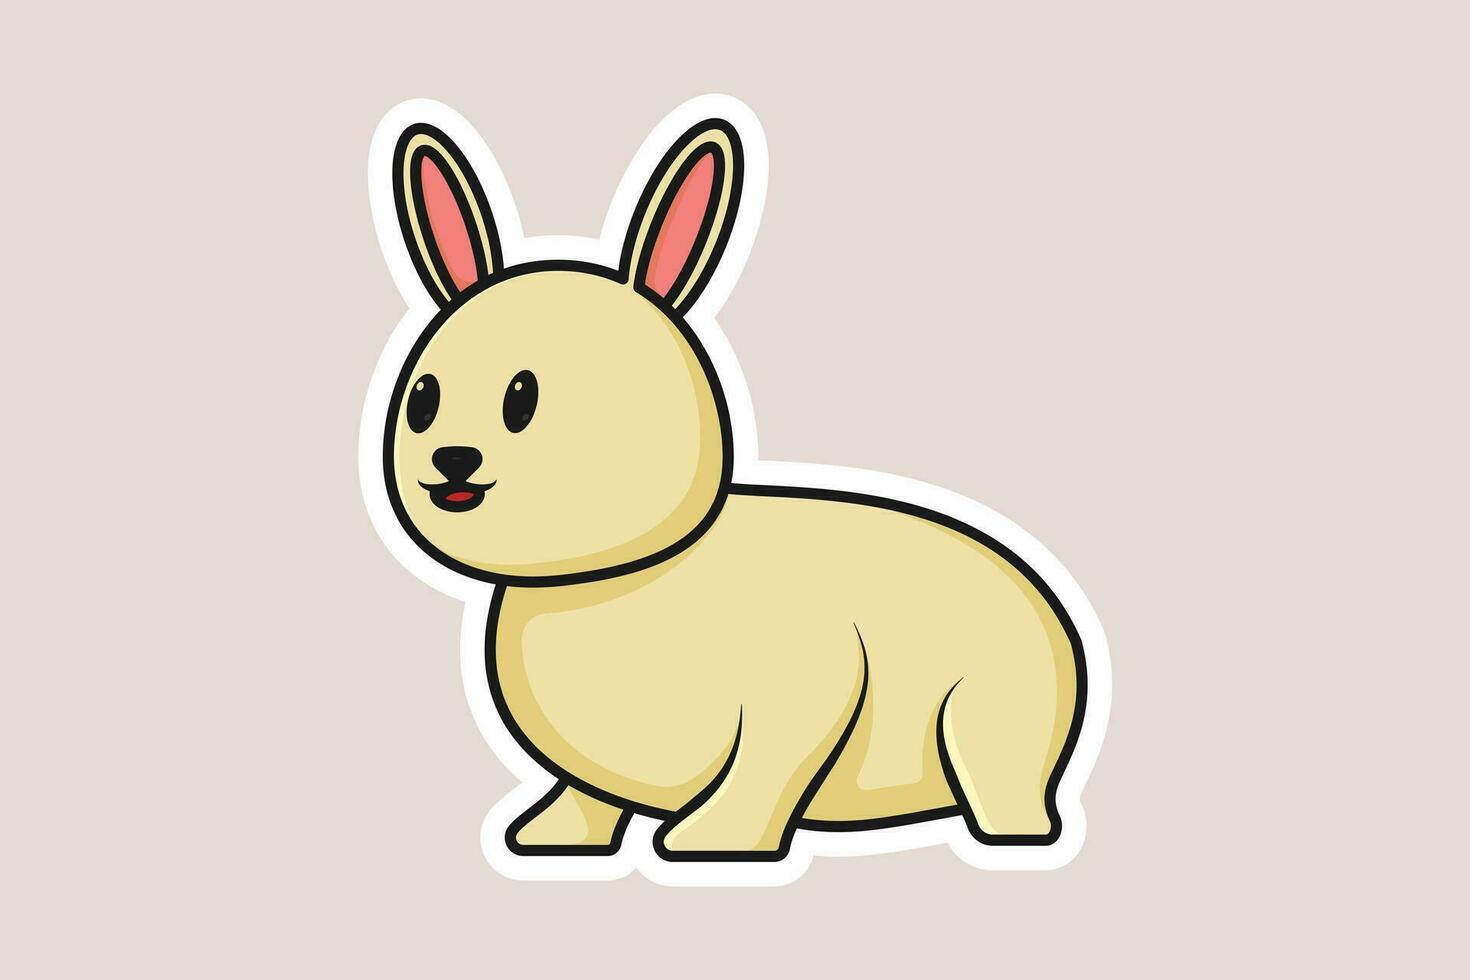 Cute Baby Rabbit Sitting Cartoon Sticker vector illustration. Animal nature icon concept. Funny furry white hares, Easter bunnies sitting sticker vector design with shadow.